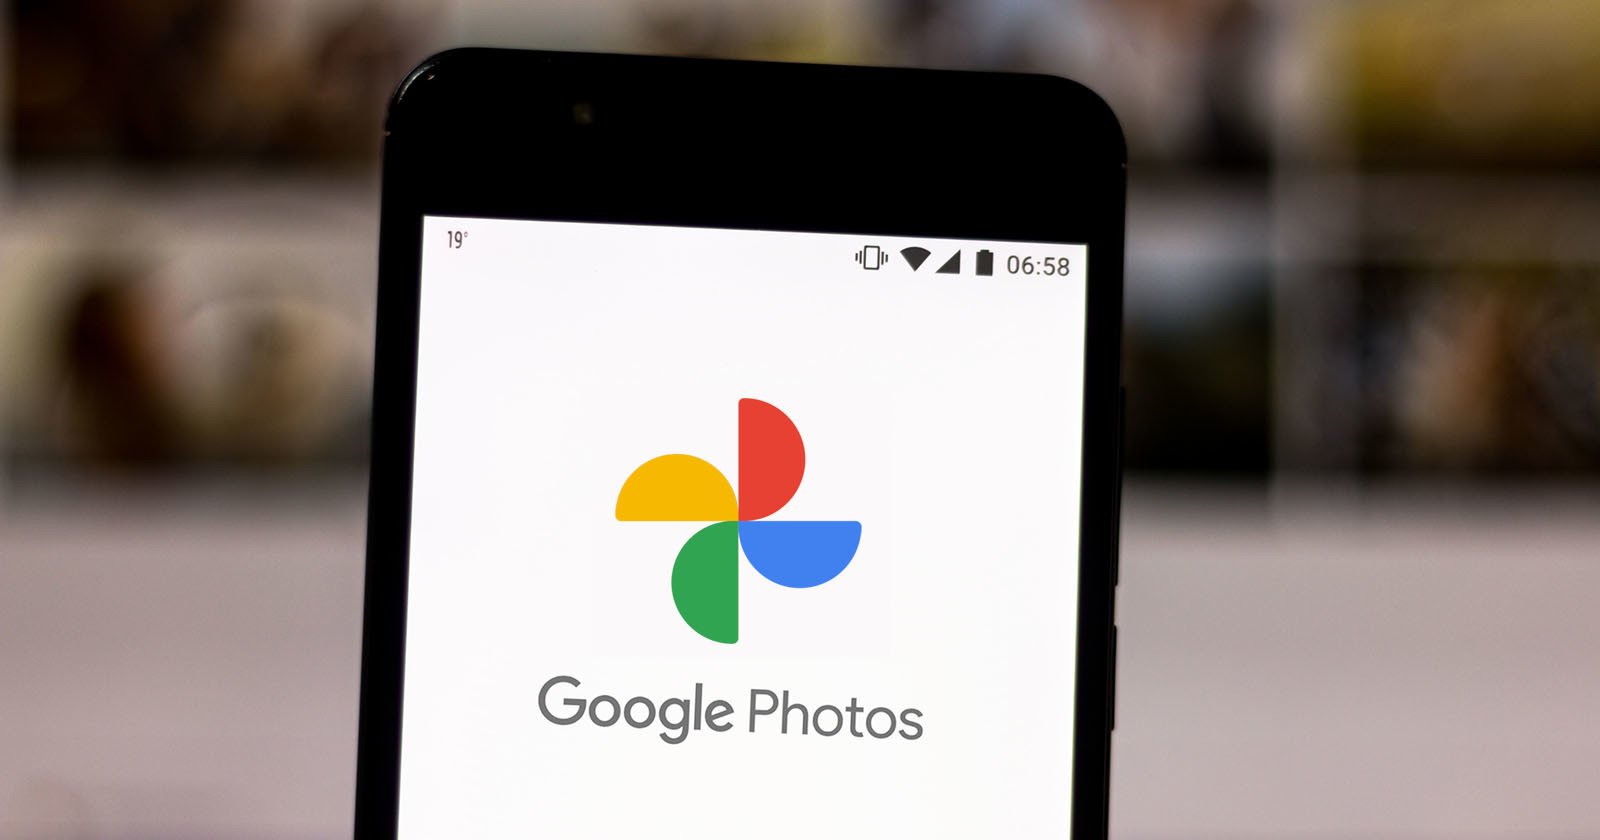  google photos now shows how much space 